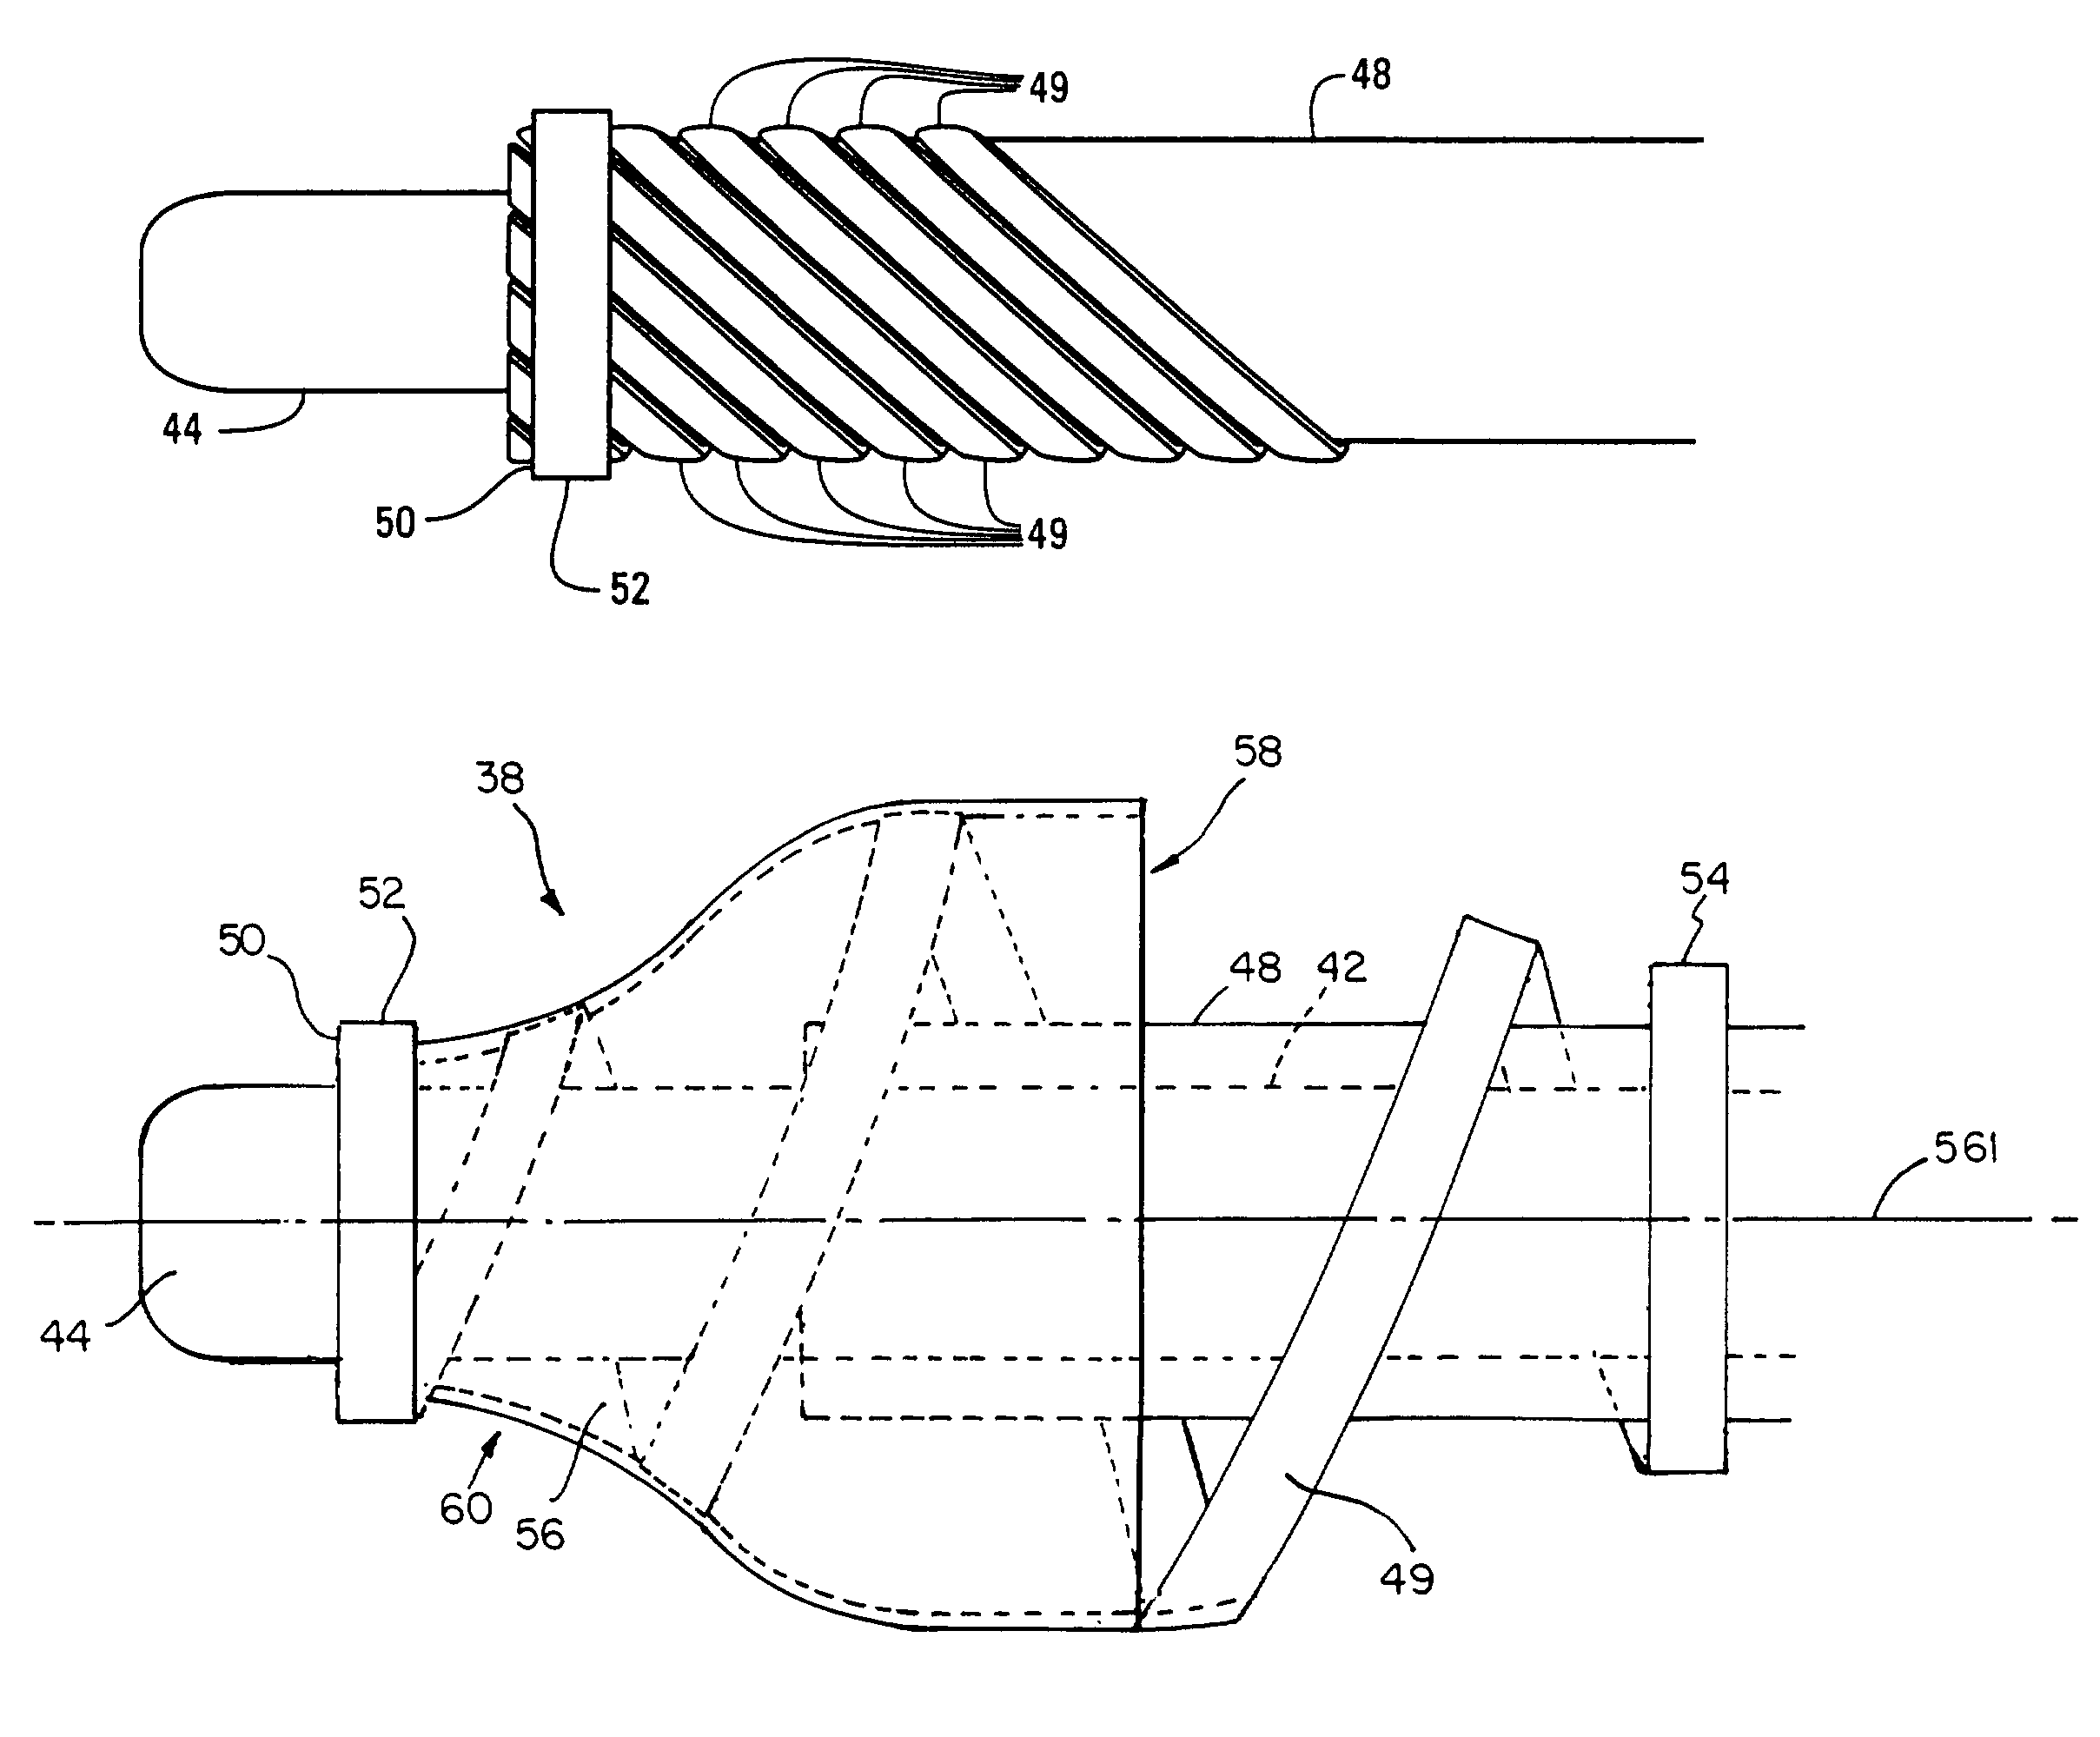 Angioplasty device and method of making same